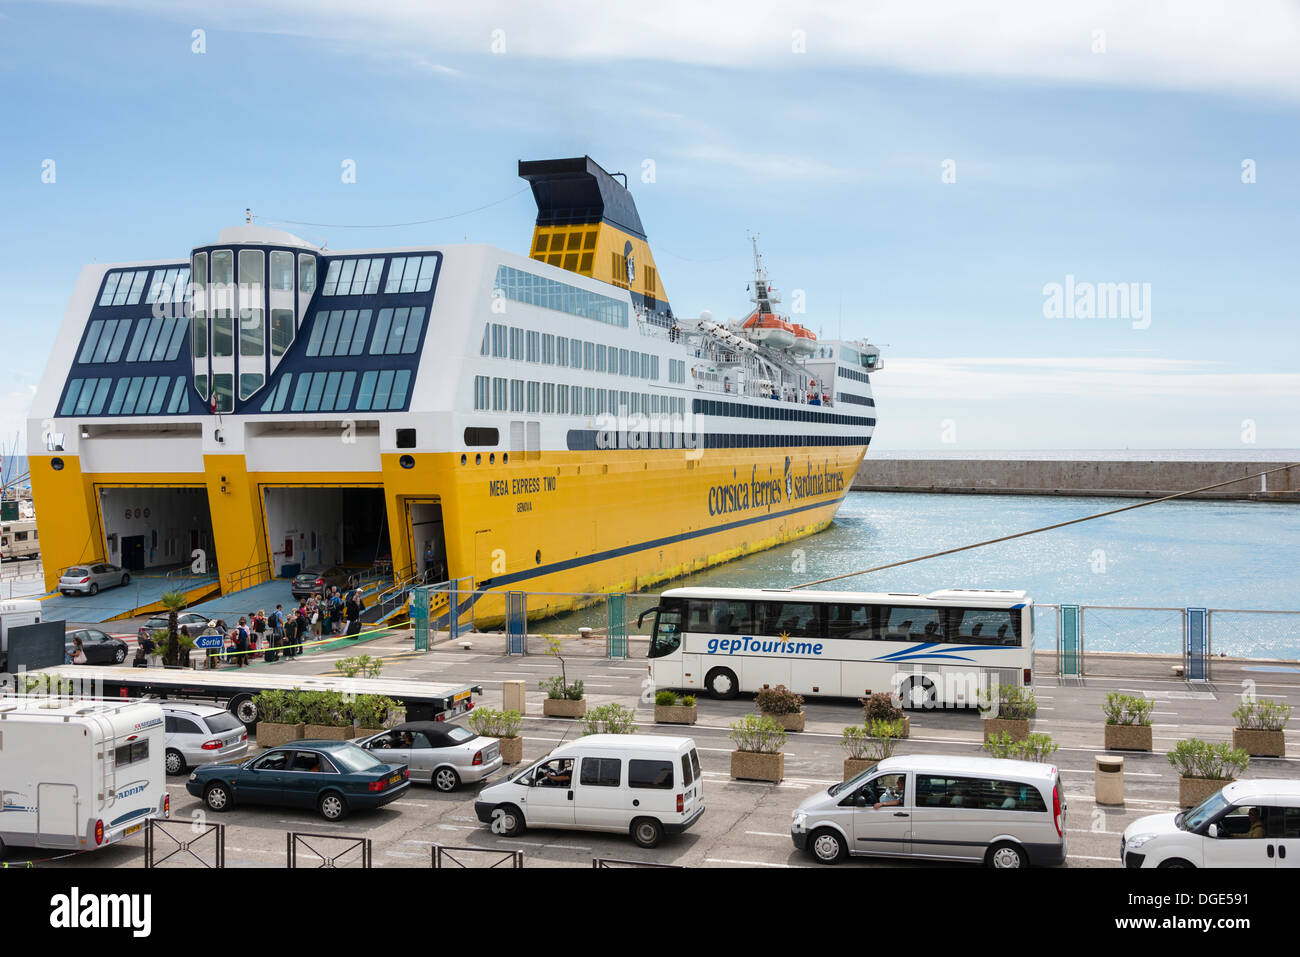 Corsica Ferry in the harbour at Monaco Stock Photo